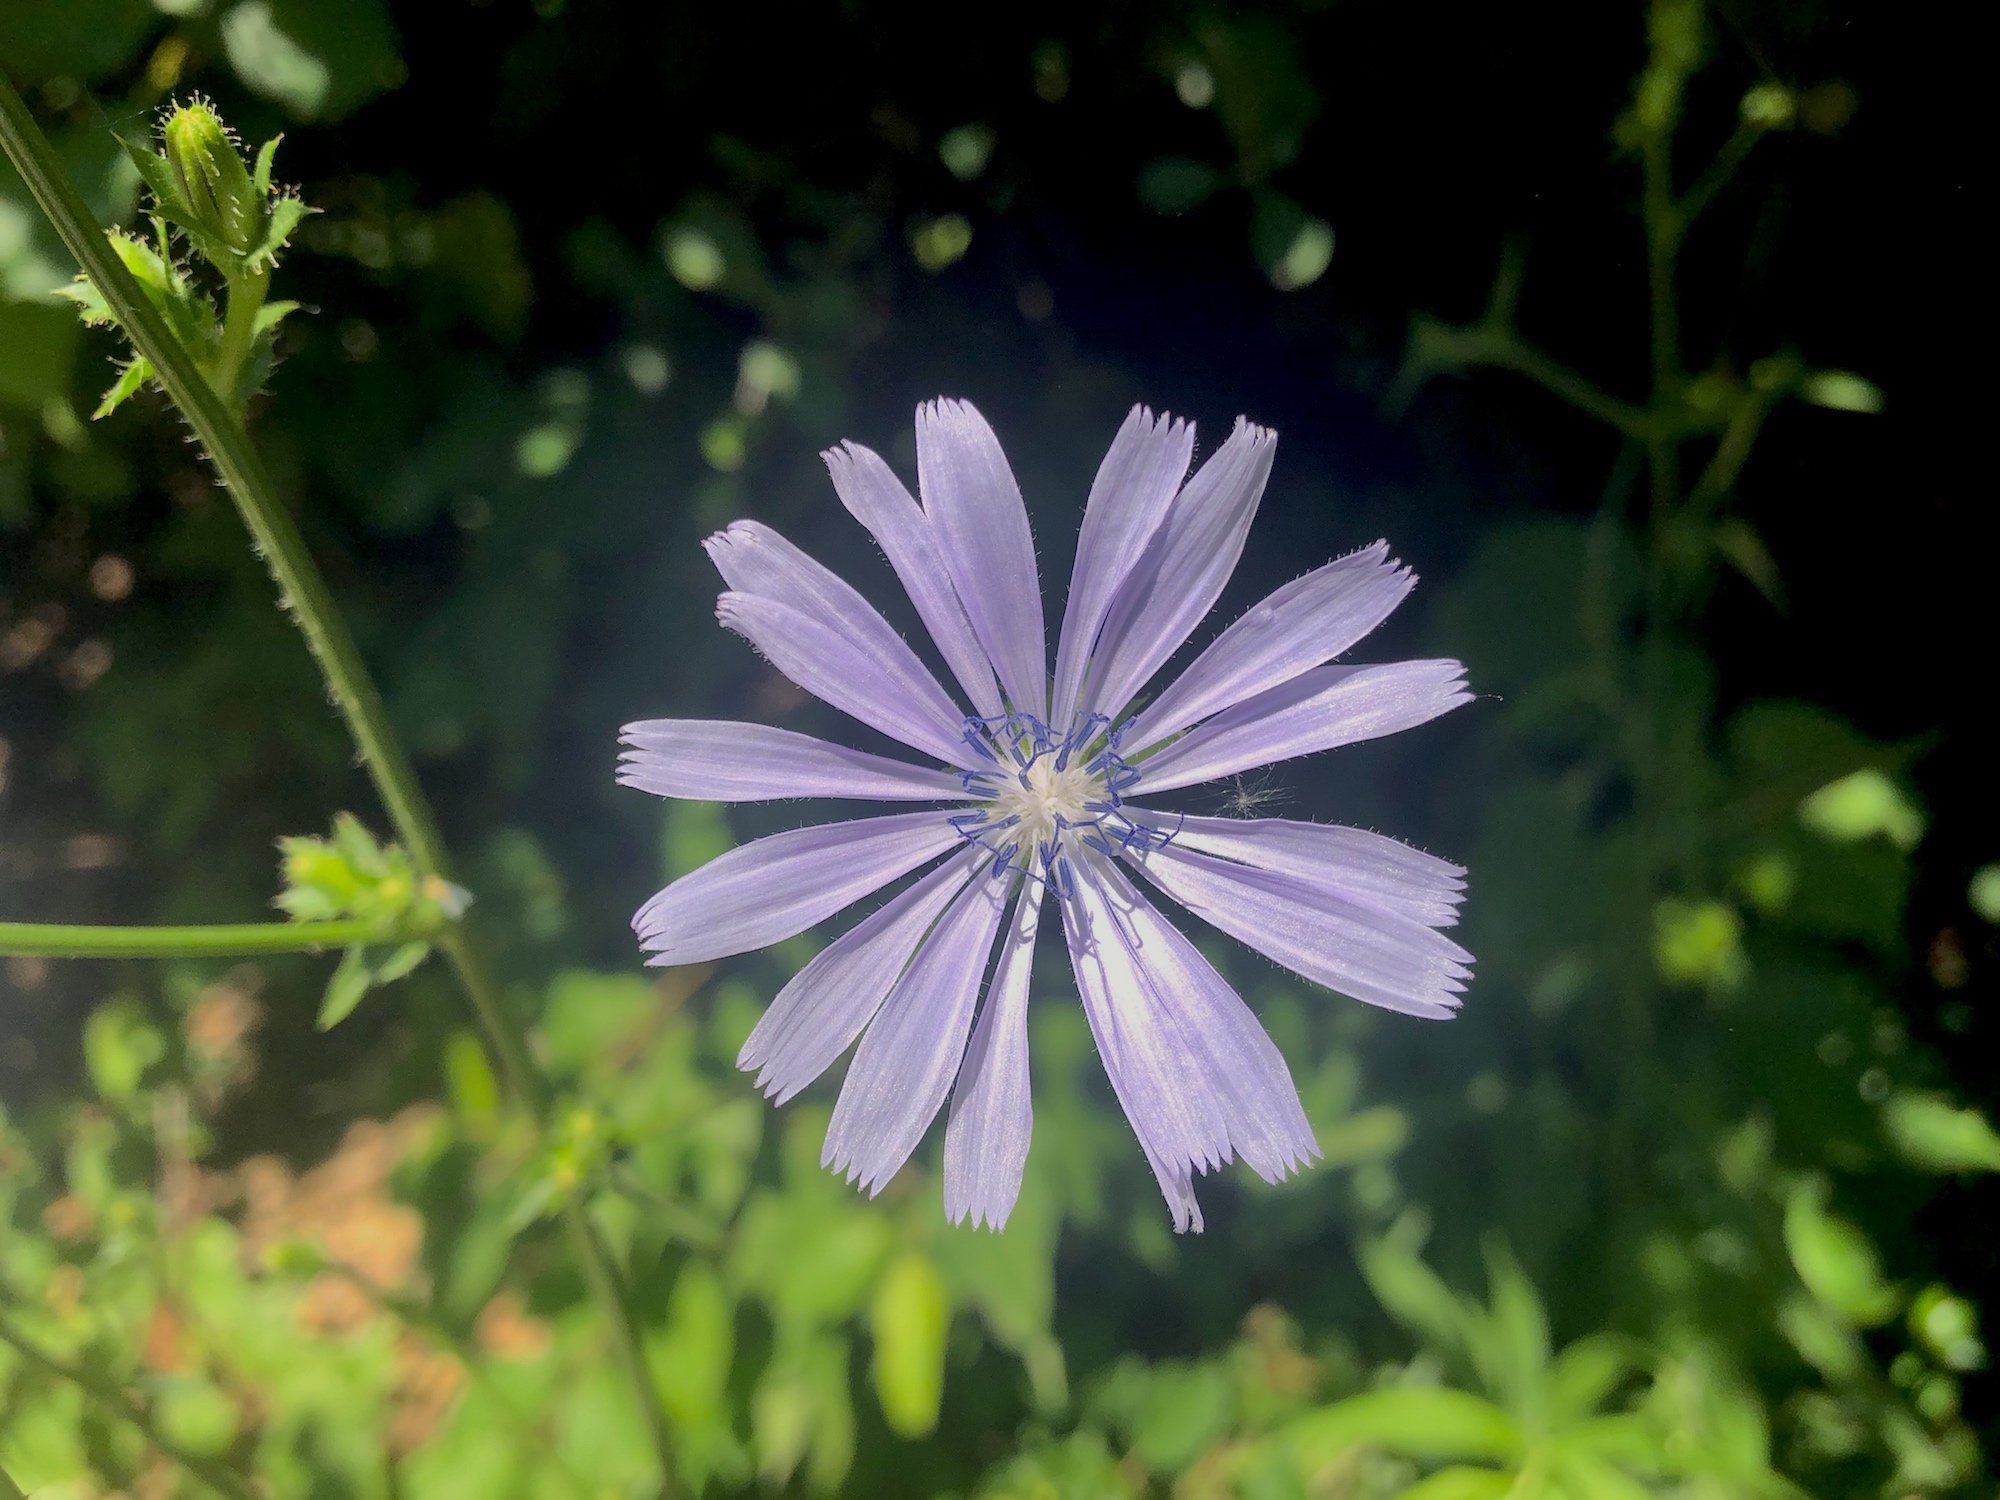 Chicory in Marion Dunn Prairie in Madison, Wisconsin on July 11, 2019.